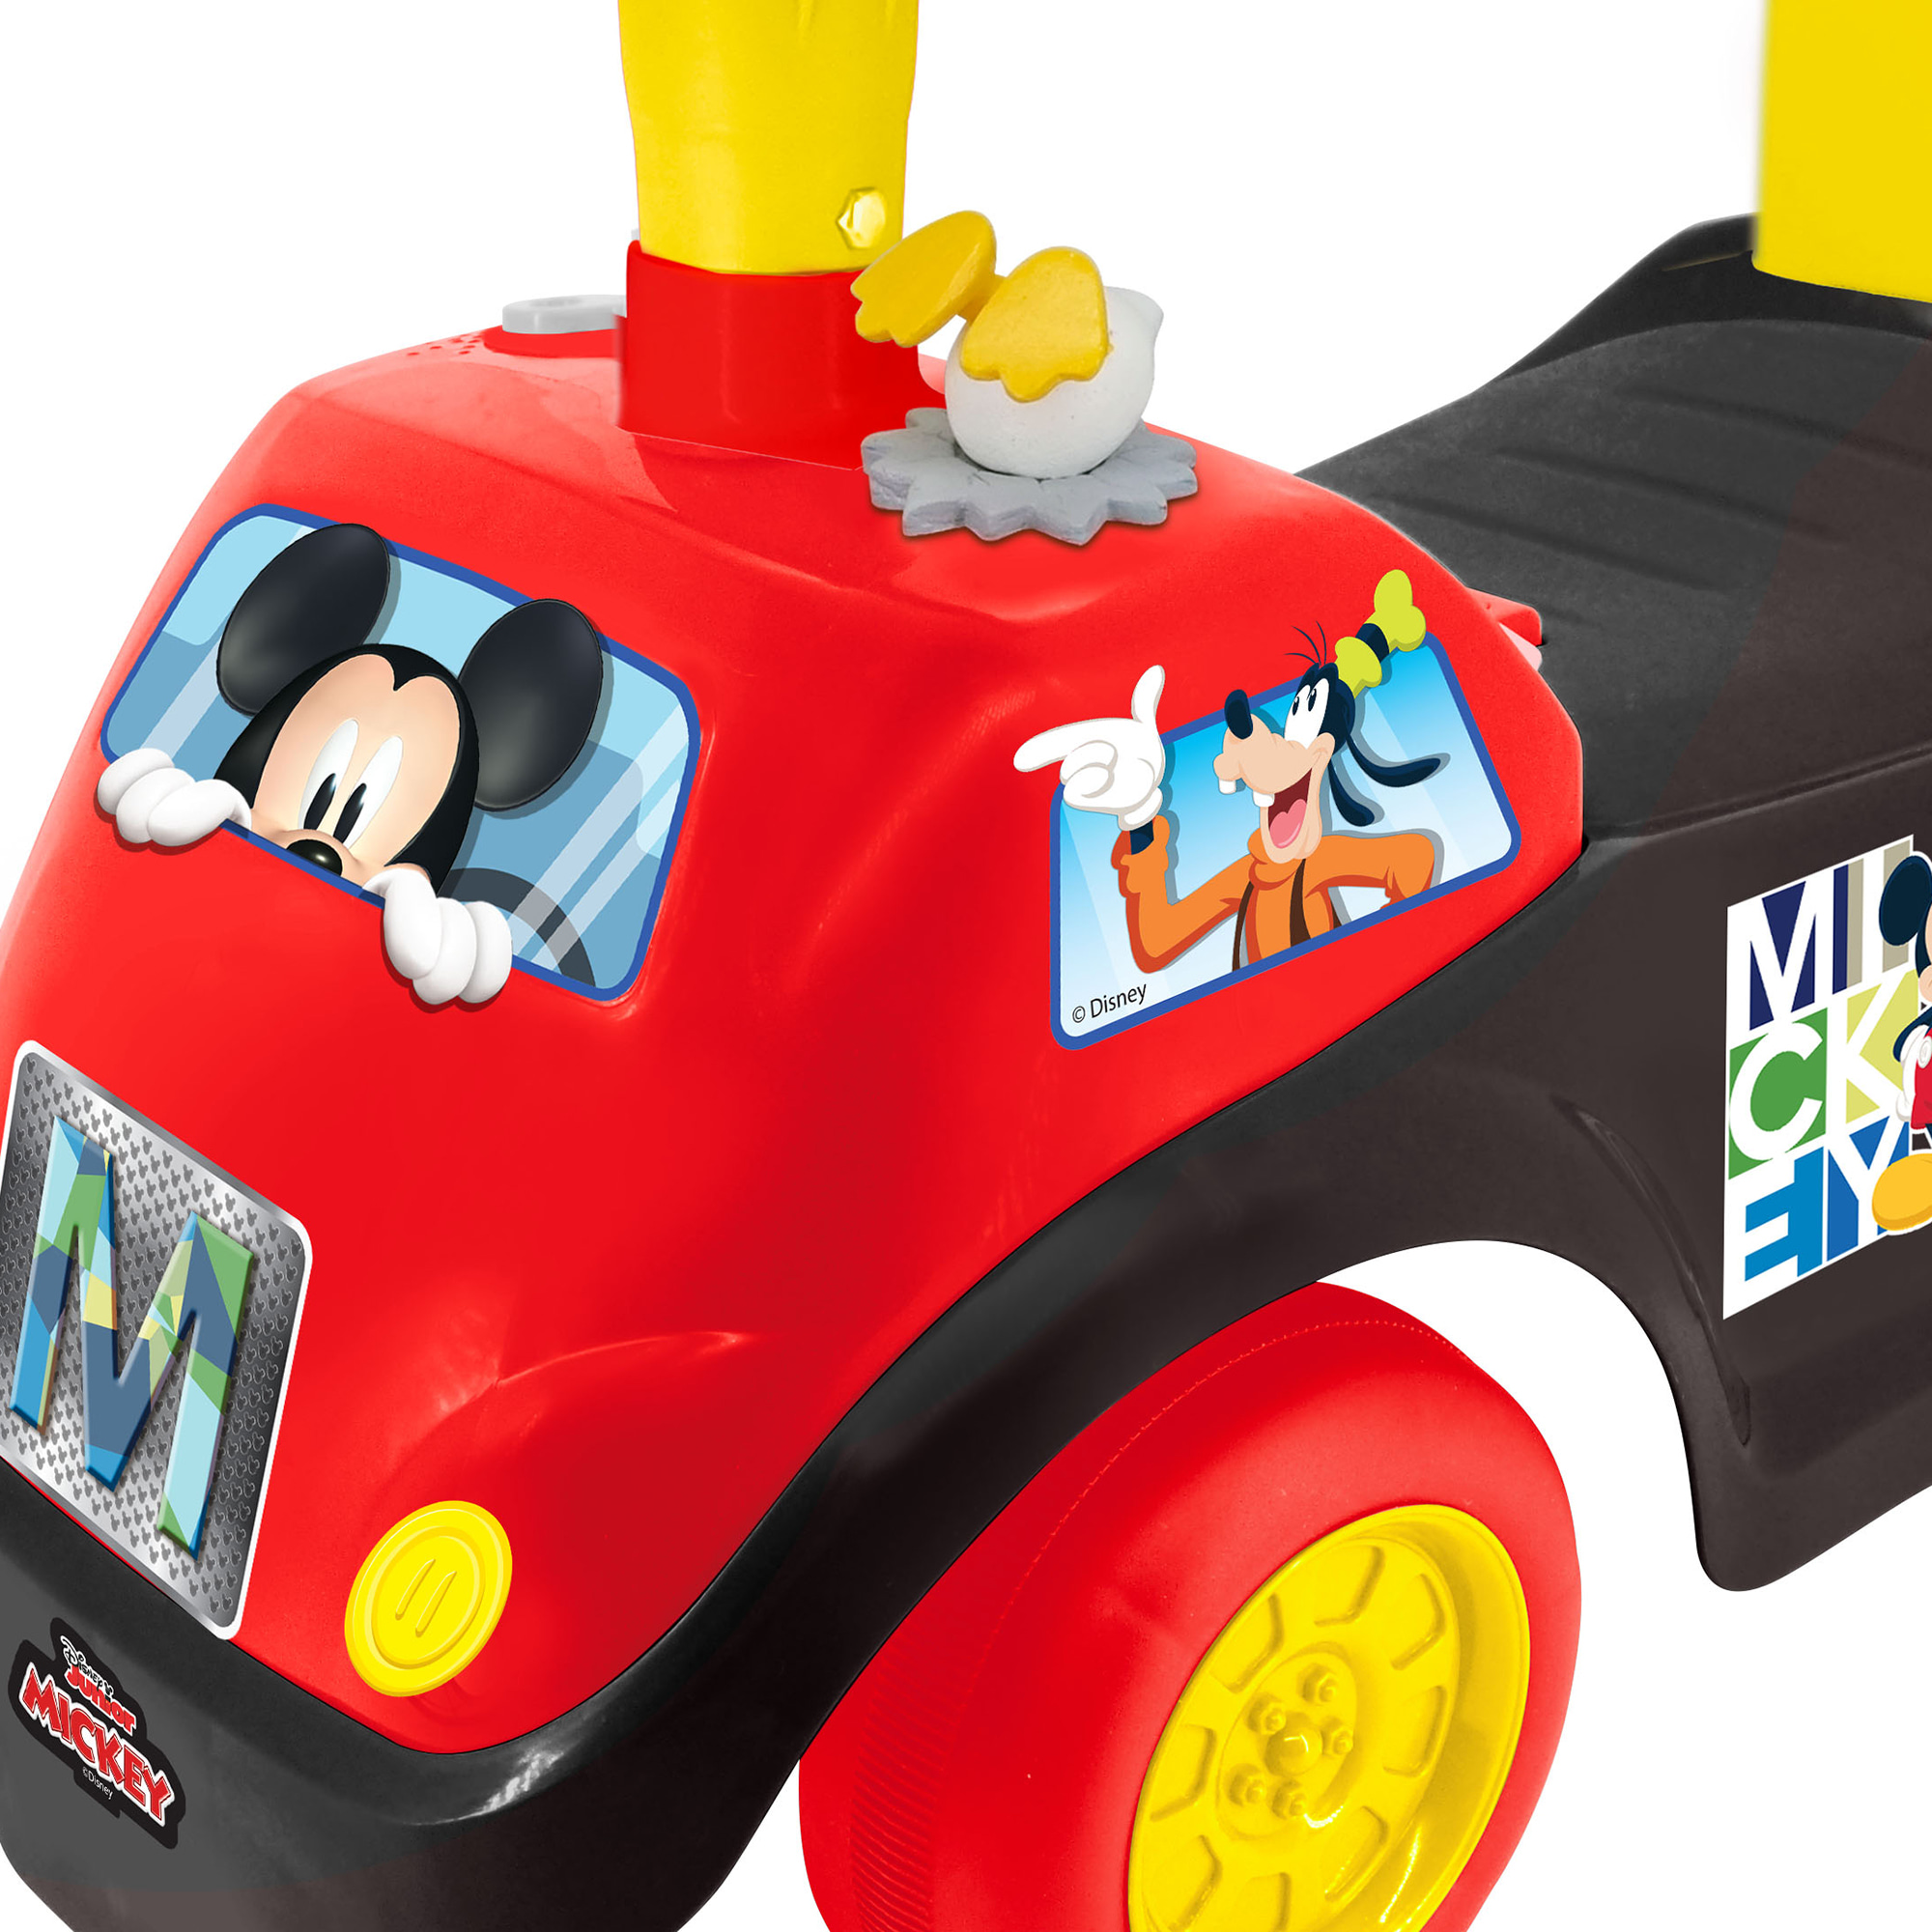 Kiddieland Disney Lights 'N' Sounds Ride-On: Mickey Mouse Kids Interactive Push Toy Car, Foot To Floor, Toddlers, Ages 12-36 Months - image 5 of 5